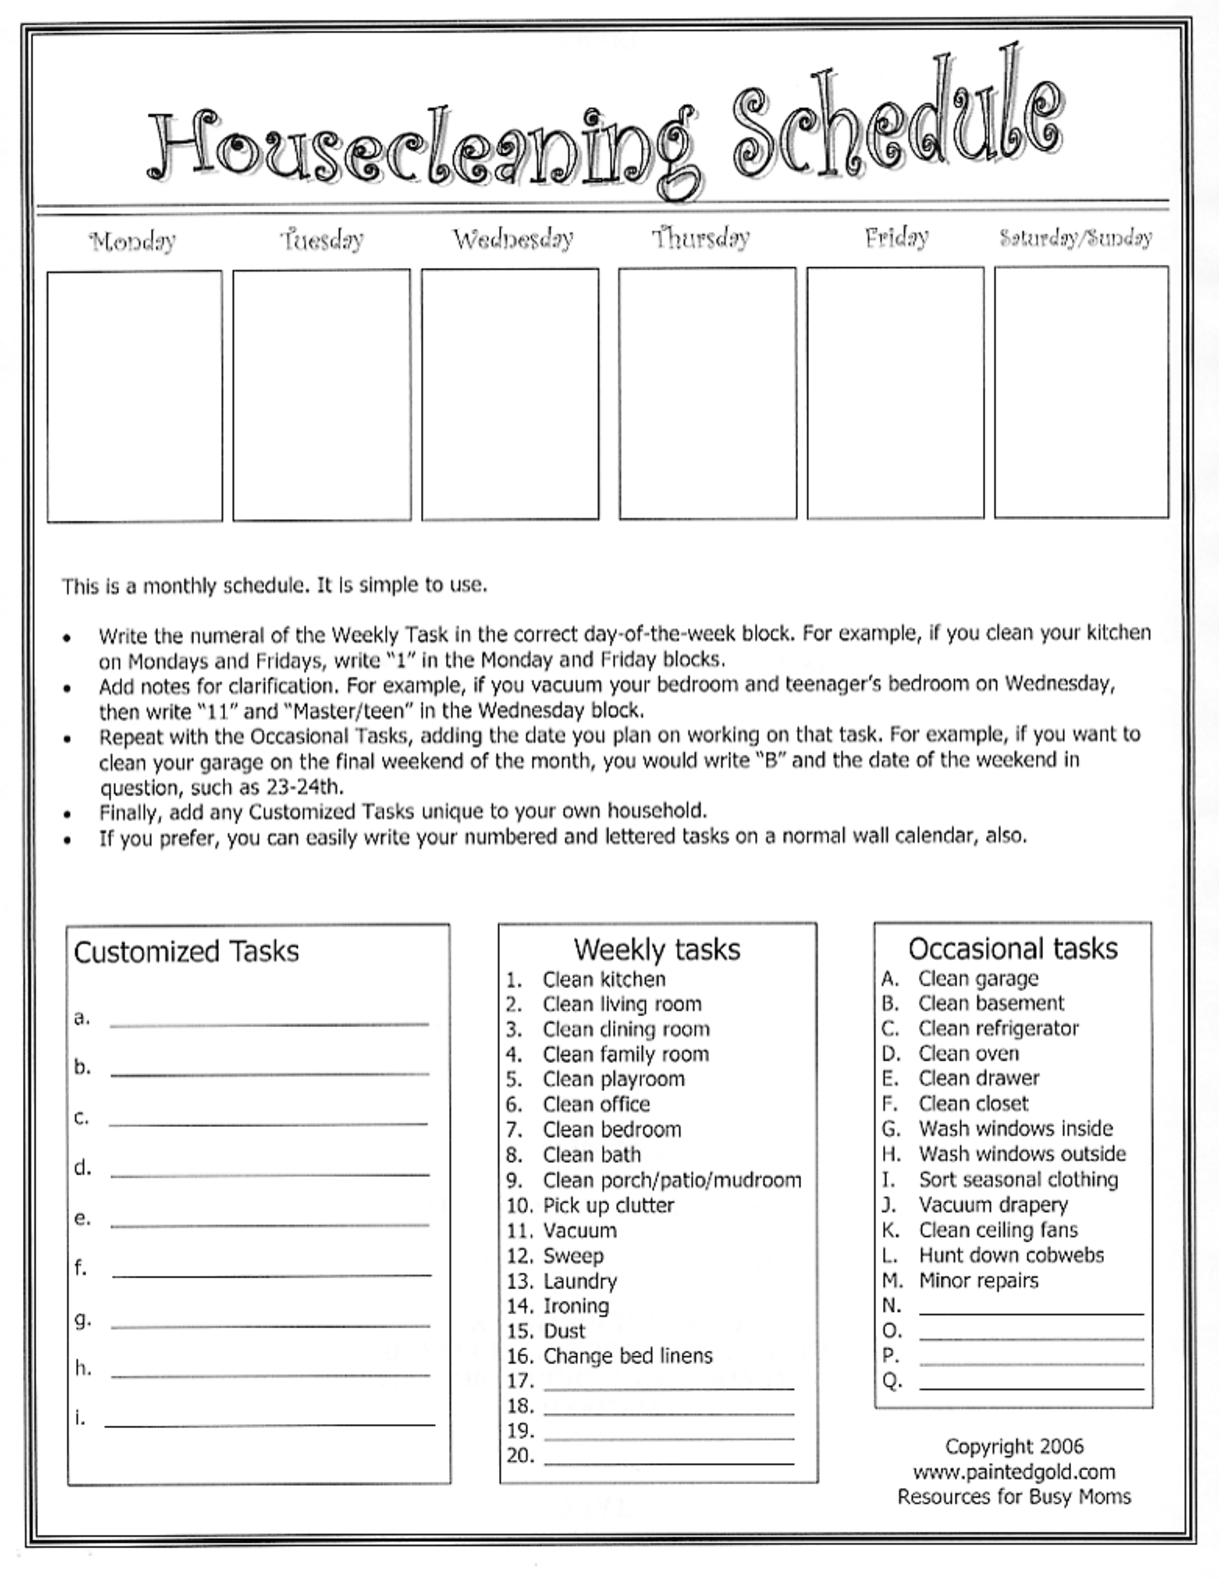 8 Images Of Free Printable Family Chore List | Klean - Free Printable Charts And Lists